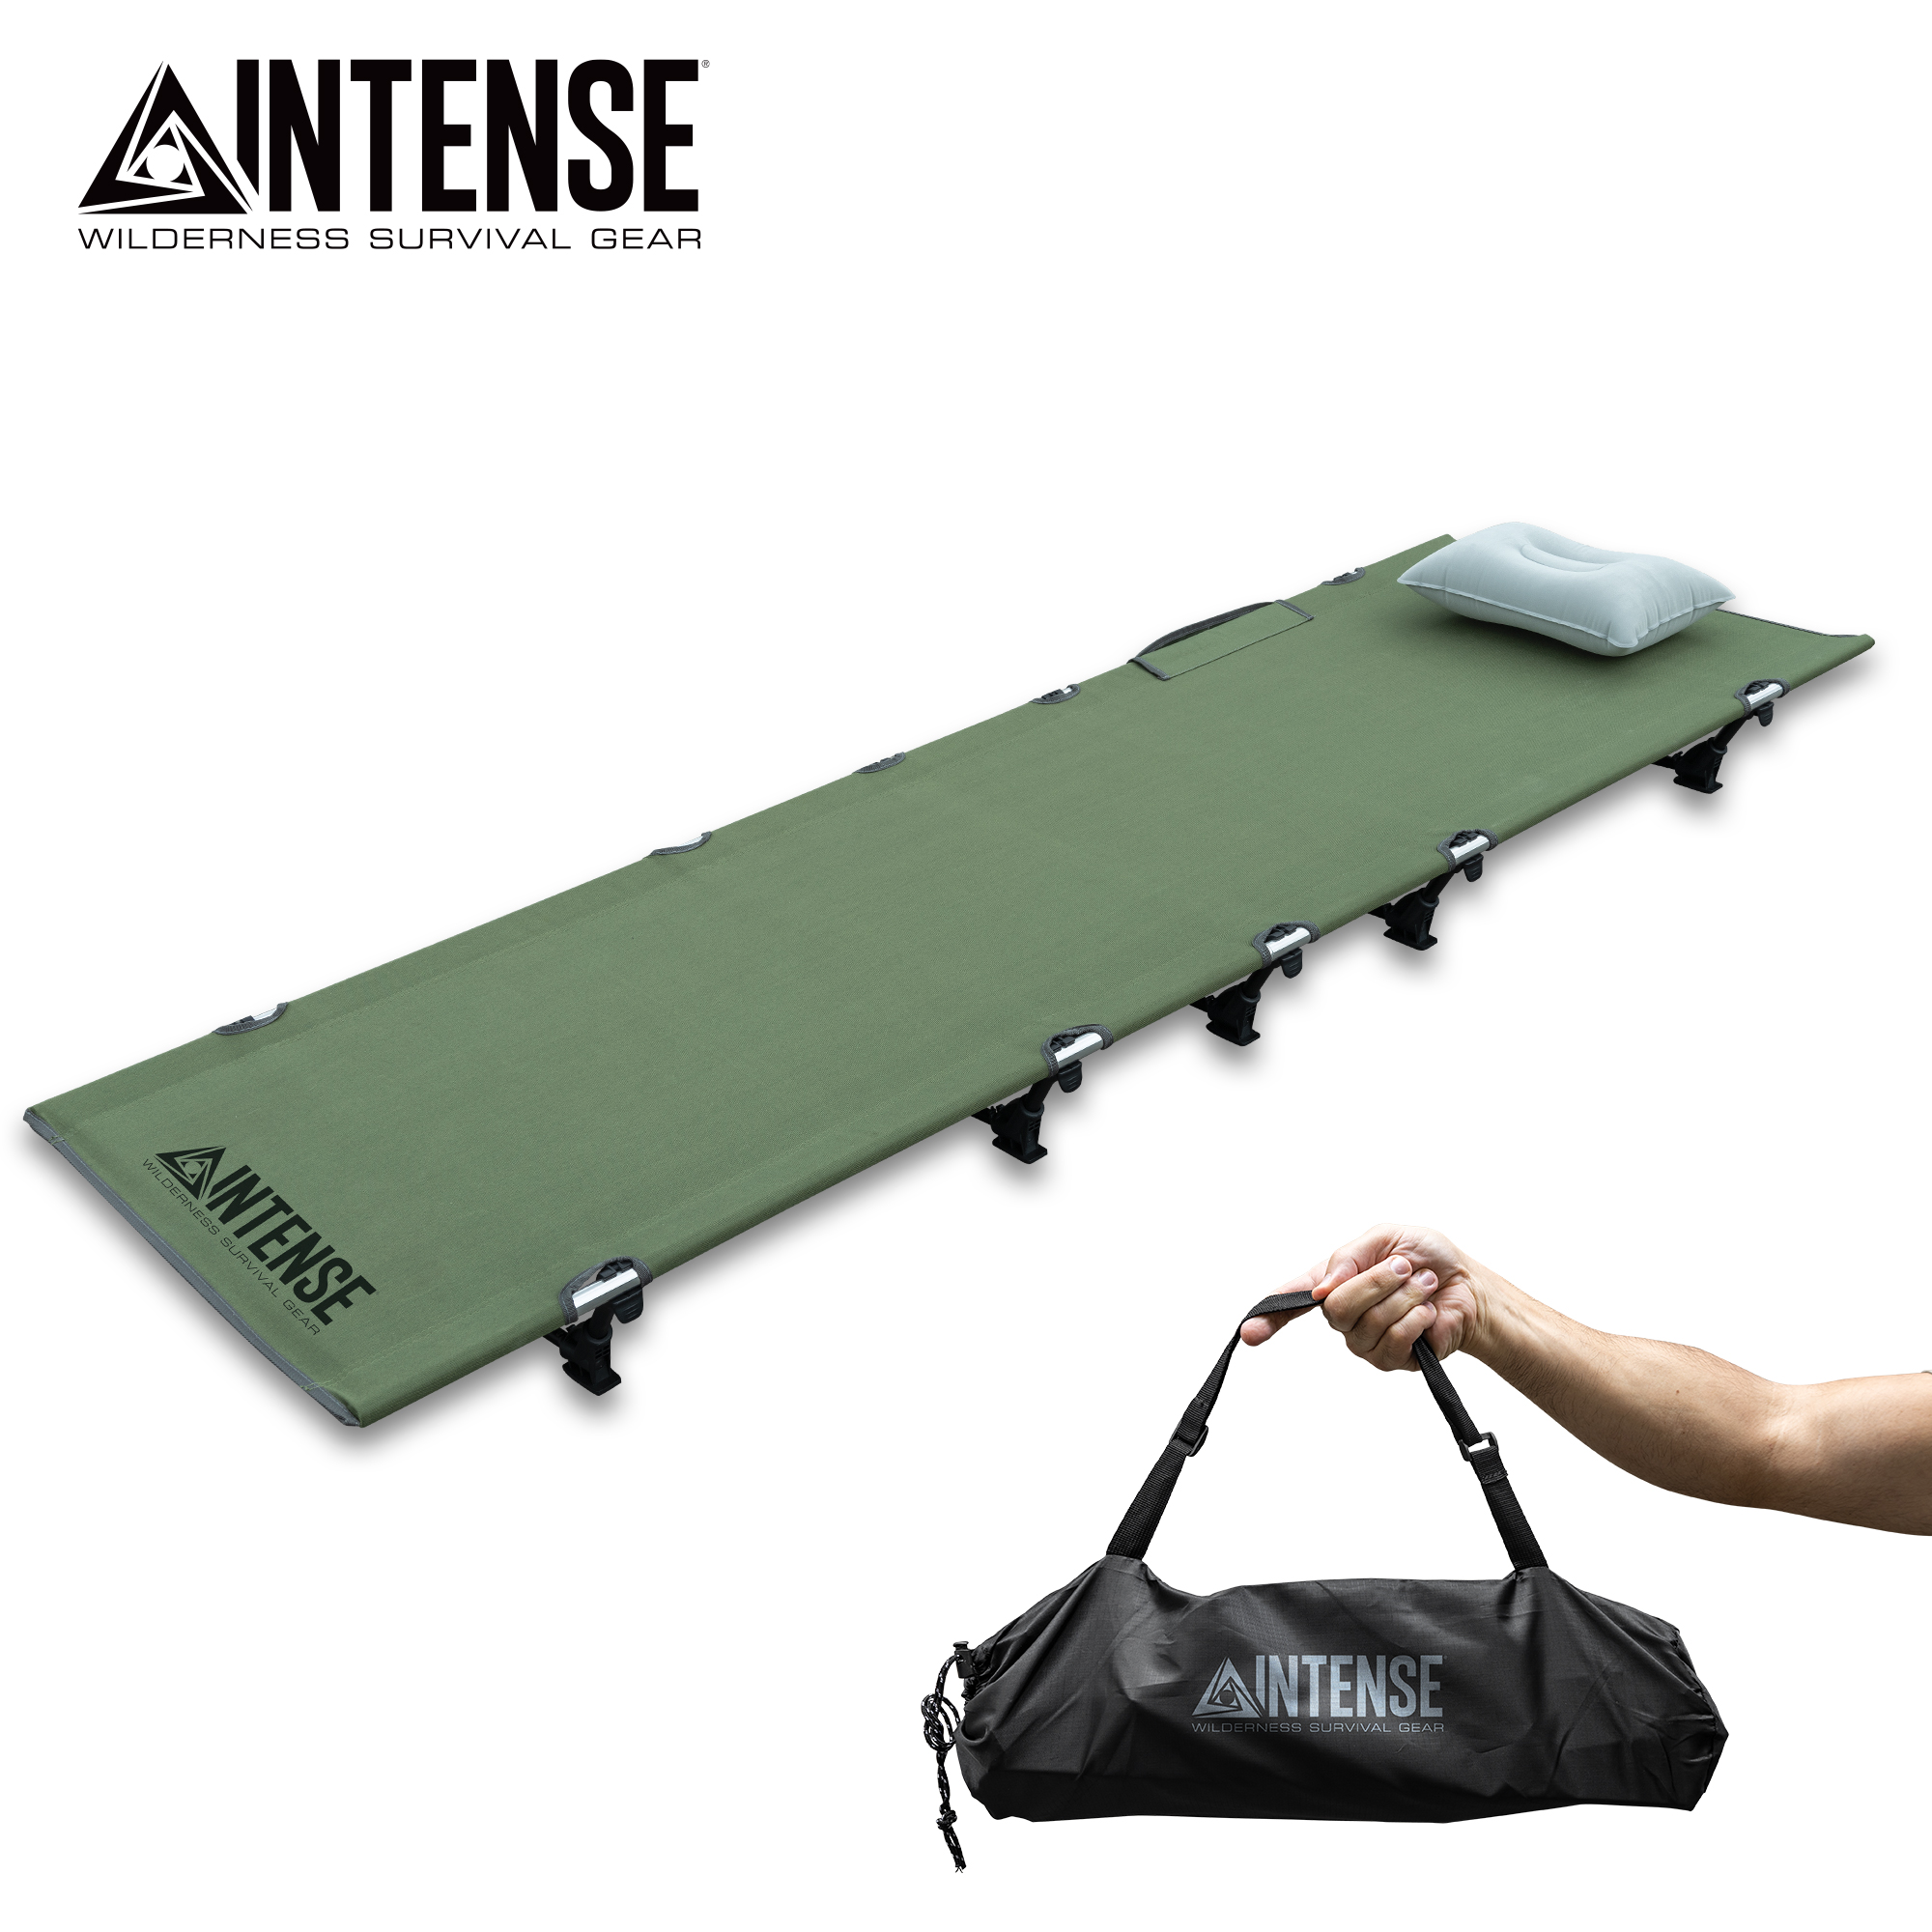 Intense Folding Camping Cot With Air Pillow - Ultra-Light, 7075 Aluminum Alloy Frame, 600D Oxford Cot, 250 LBS Capacity